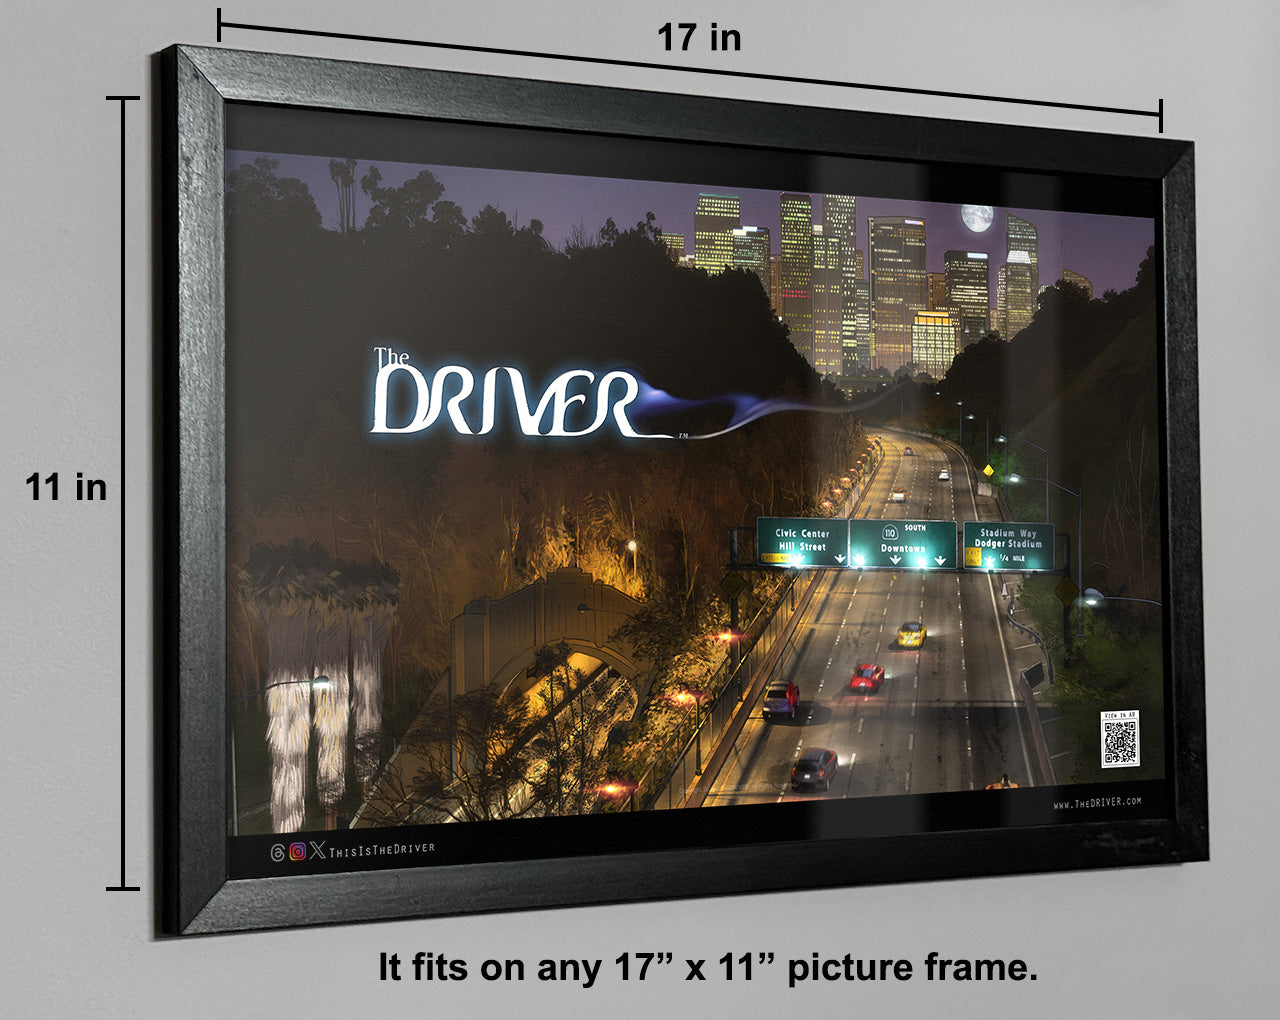 The DRIVER - AR Animated Poster 17"x11" - Chapter 1